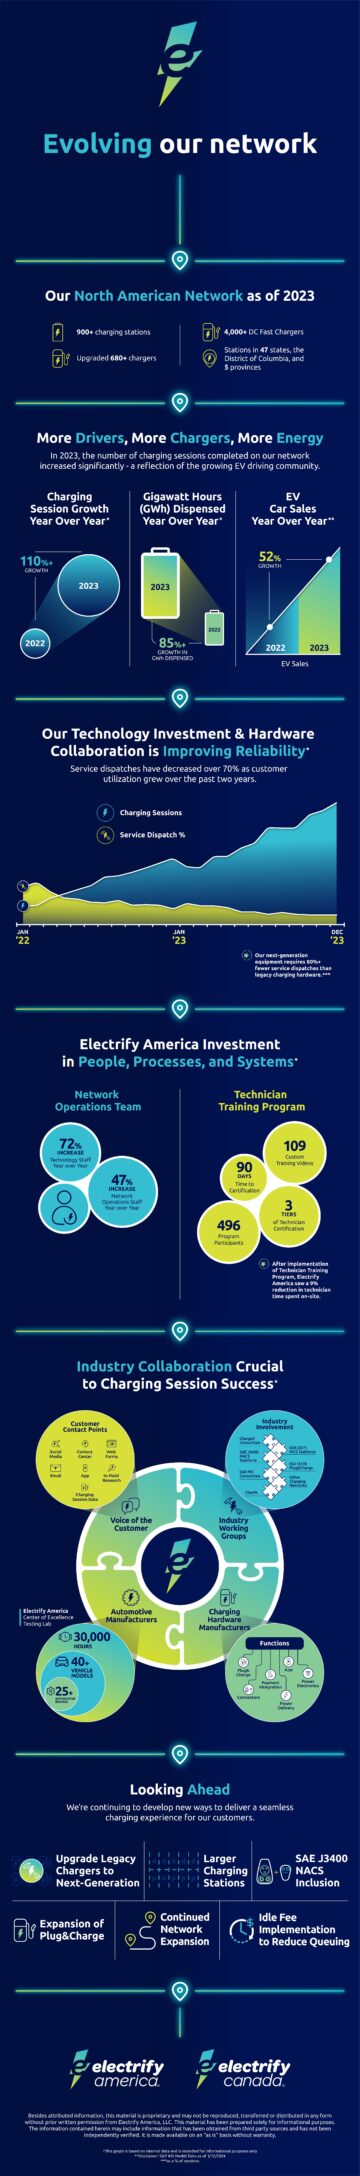 Infographic Shows What Electrify America Did In 2023 - CleanTechnica